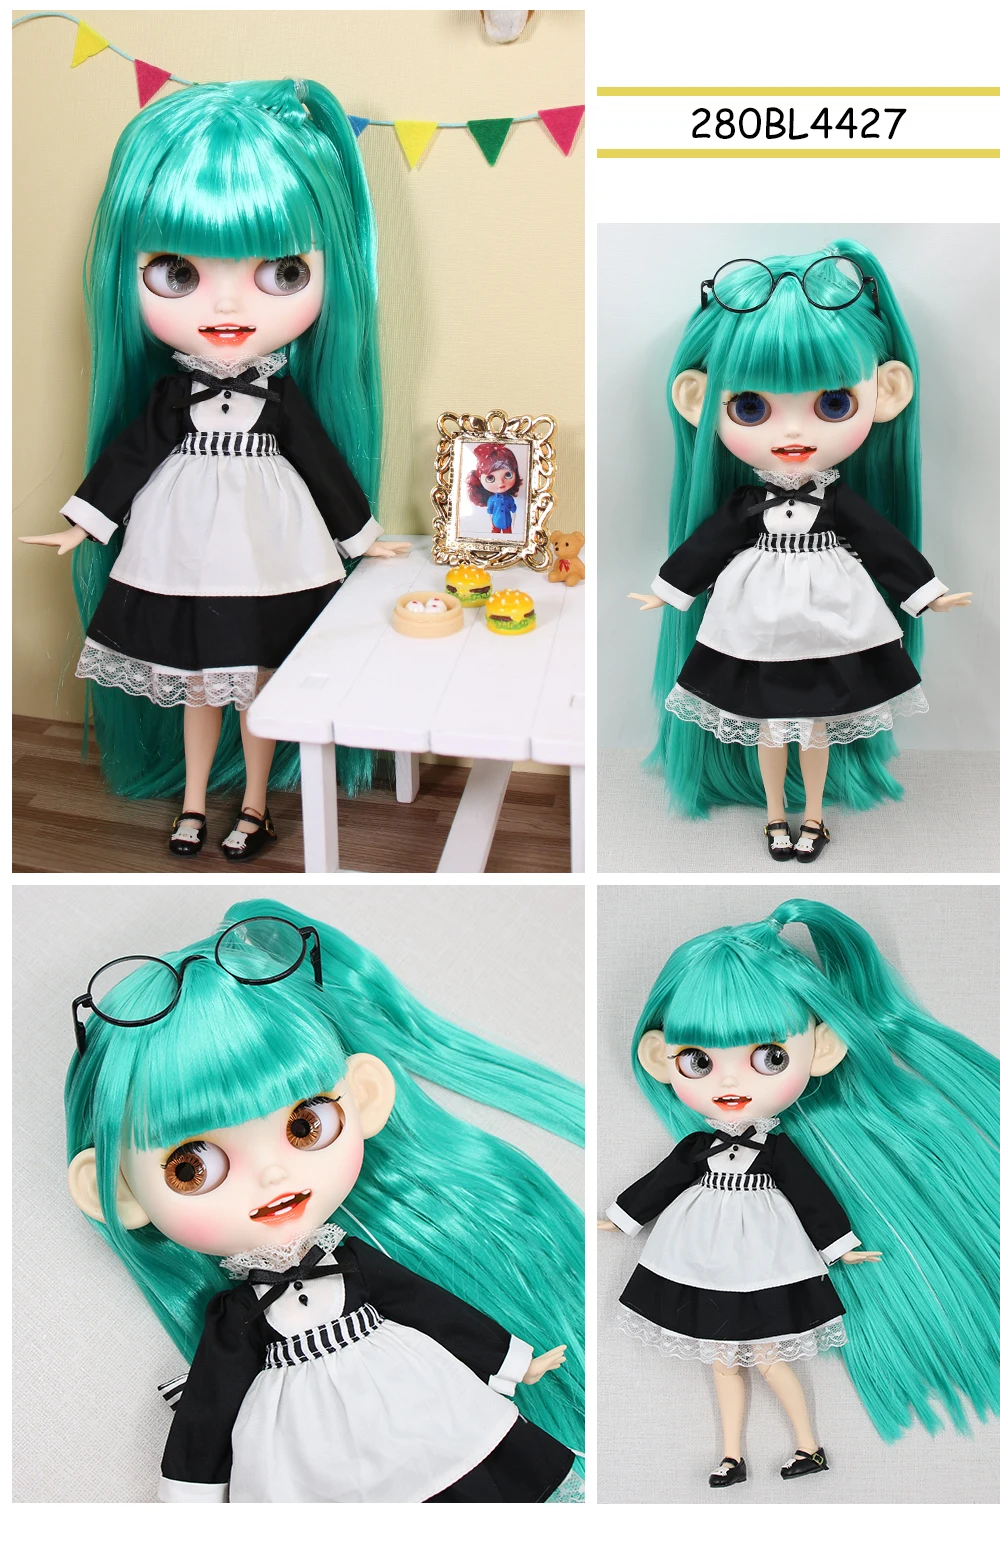 Catalina – Premium Custom Neo Blythe Doll with Green Hair, White Skin & Matte Smiling Face 1